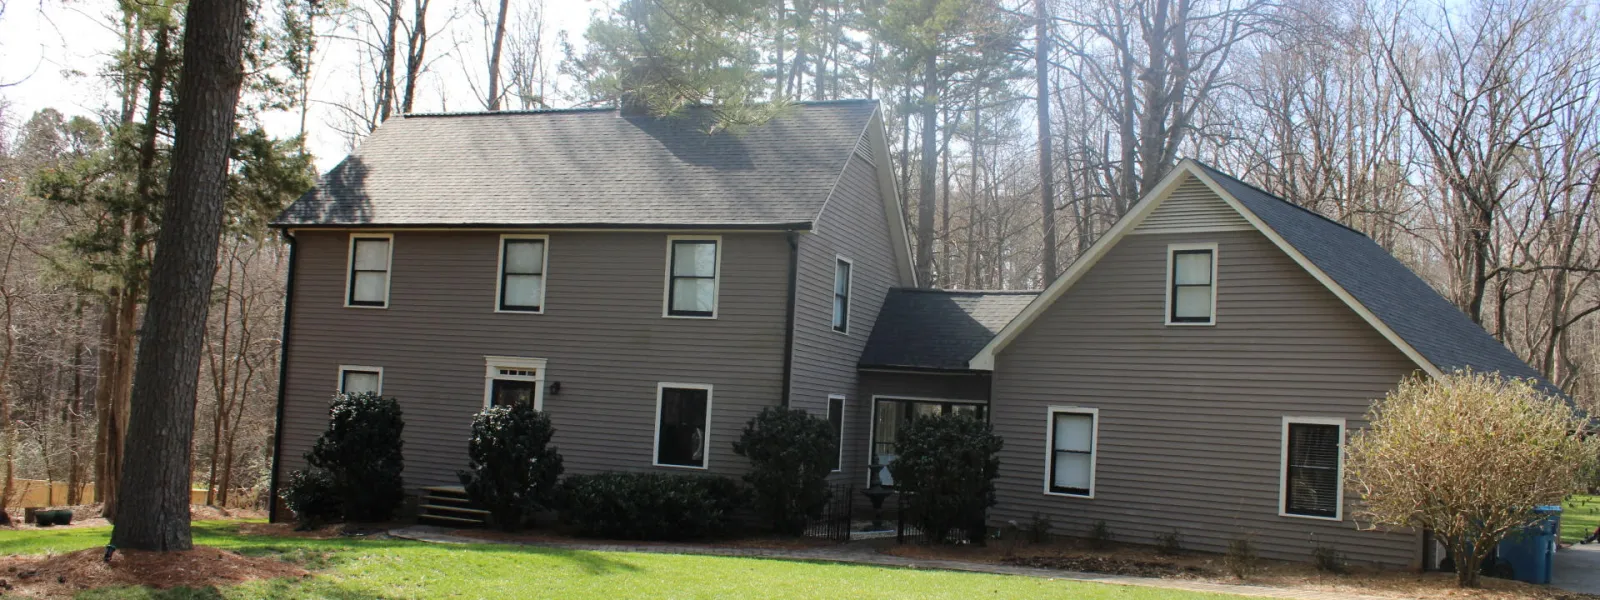 Full Roof Replacement in Greensboro, North Carolina by ARAC Roof It Forward.